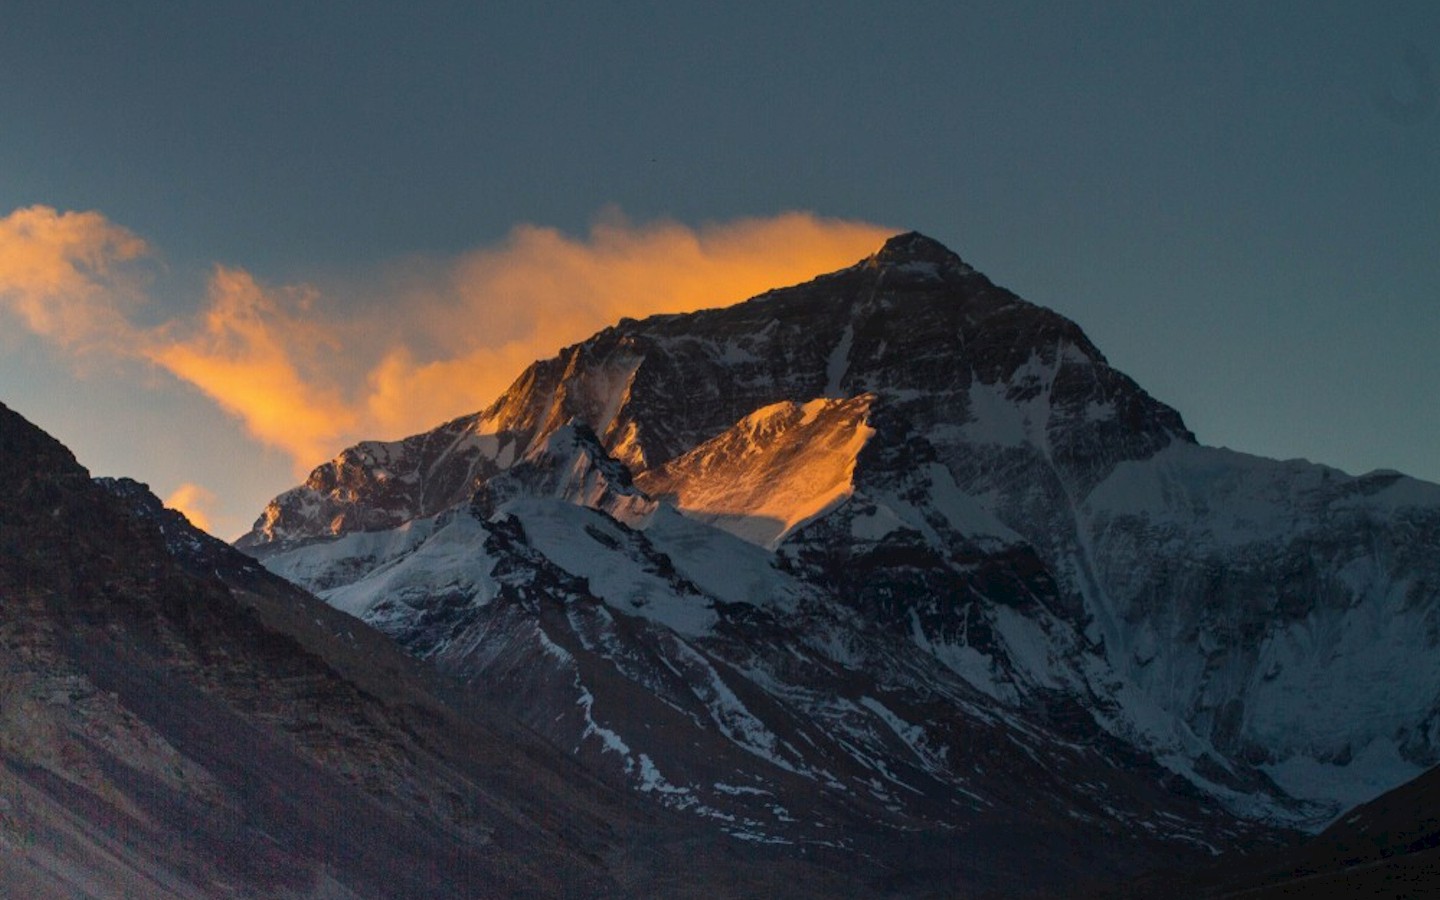 Mount Everest, also known in Nepal as Sagarmāthā and in Tibet as Chomolungma, is Earth's highest mountain. It is located in the Mahalangur mountain range in Nepal and Tibet. Its peak is 8,848 metres (29,029 ft) above sea level